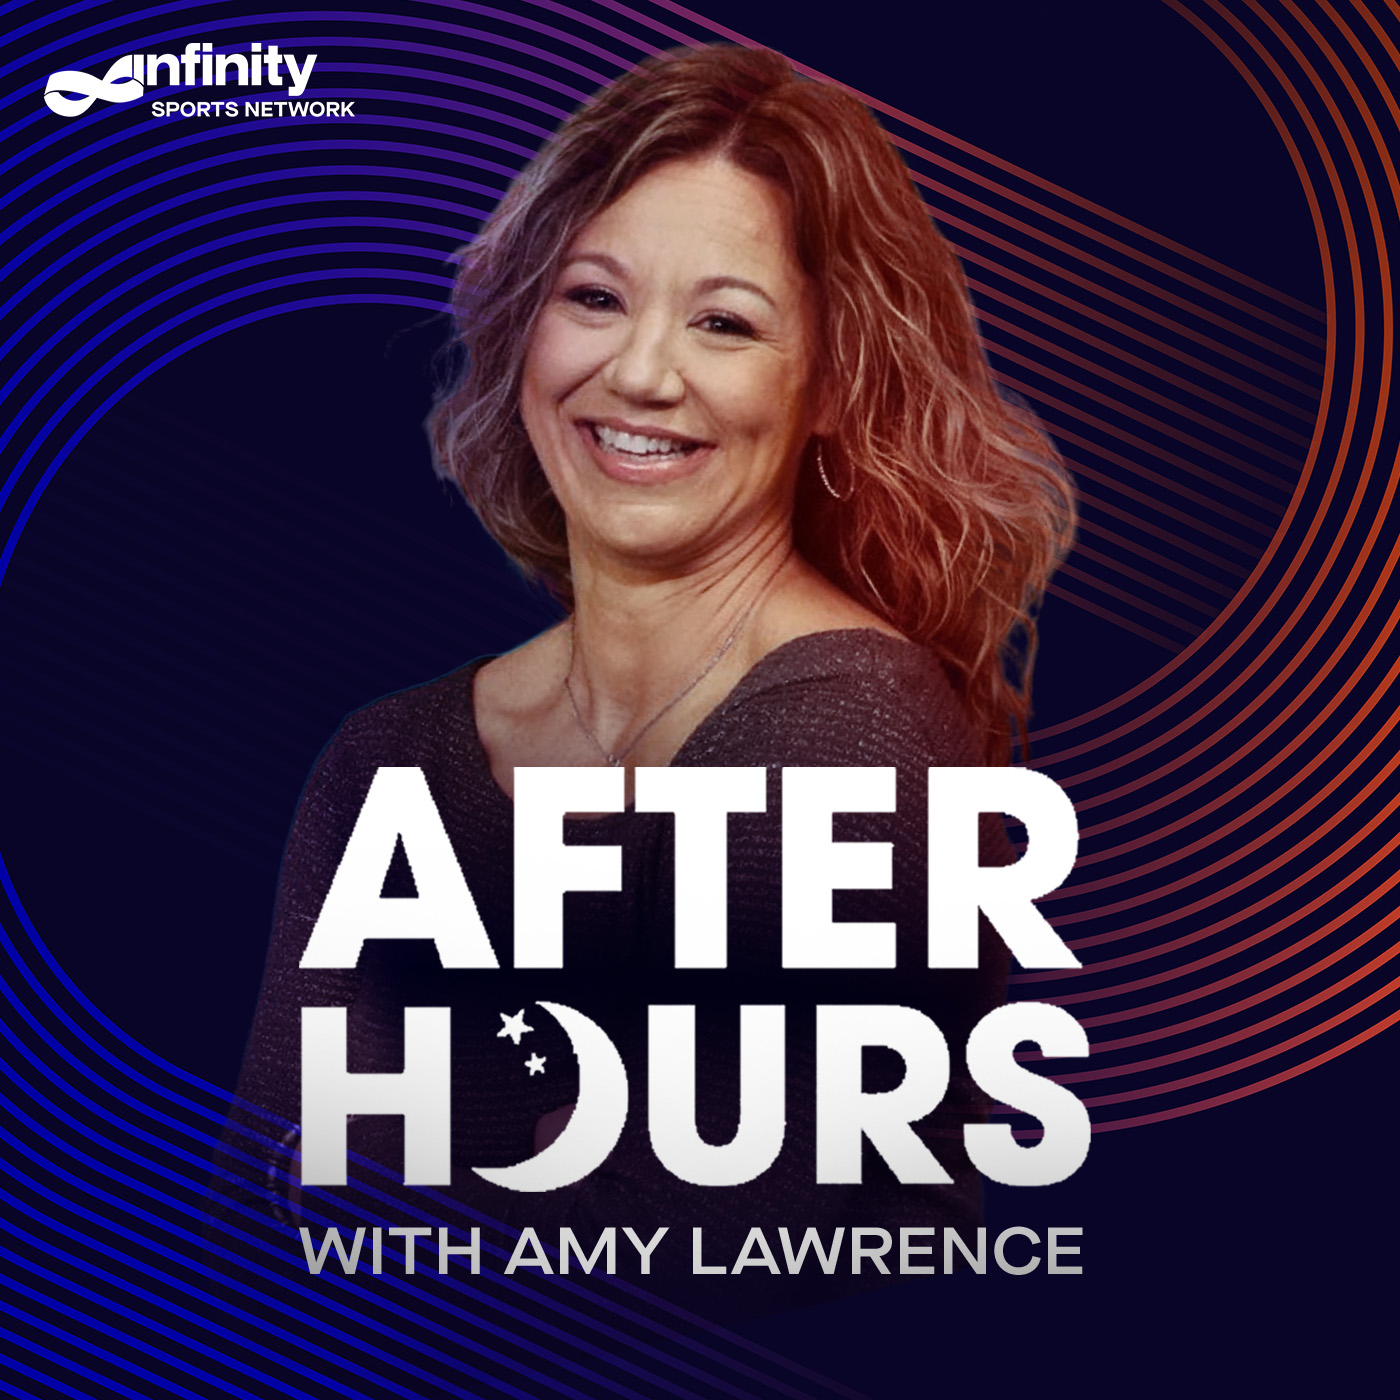 10-8-21 After Hours with Amy Lawrence PODCAST: Hour 2